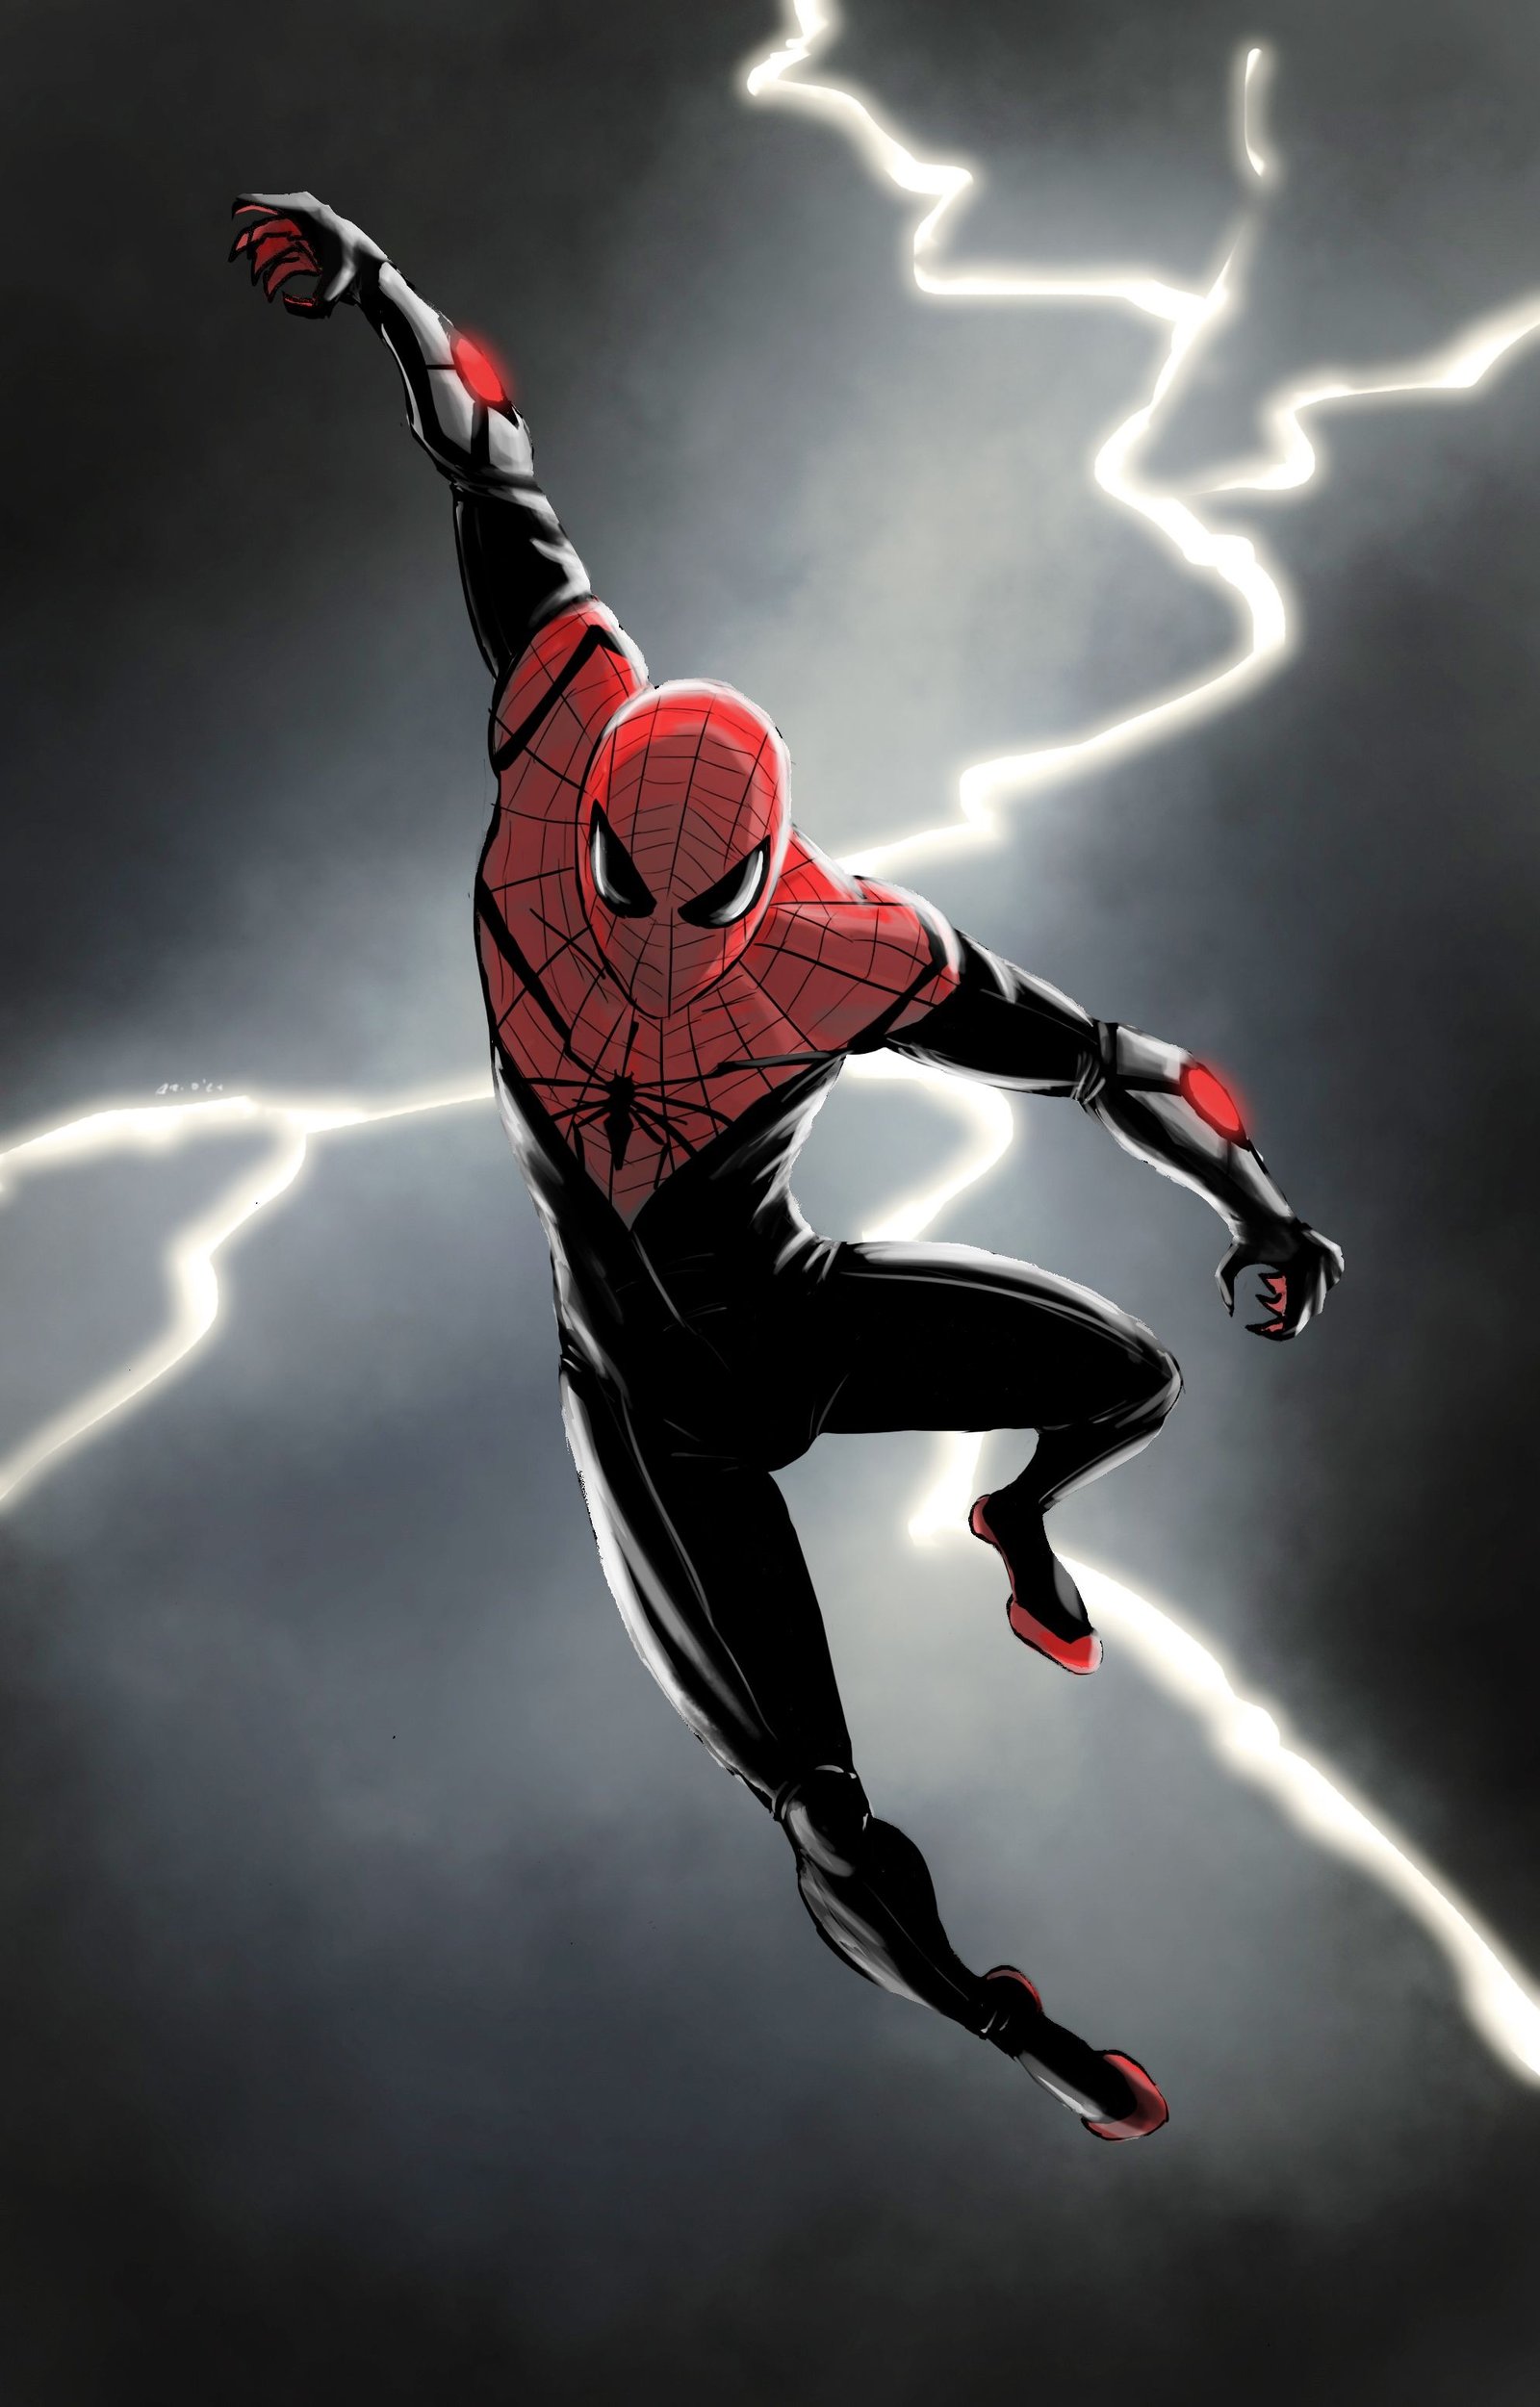 Spiderman Wallpaper HD For Iphone